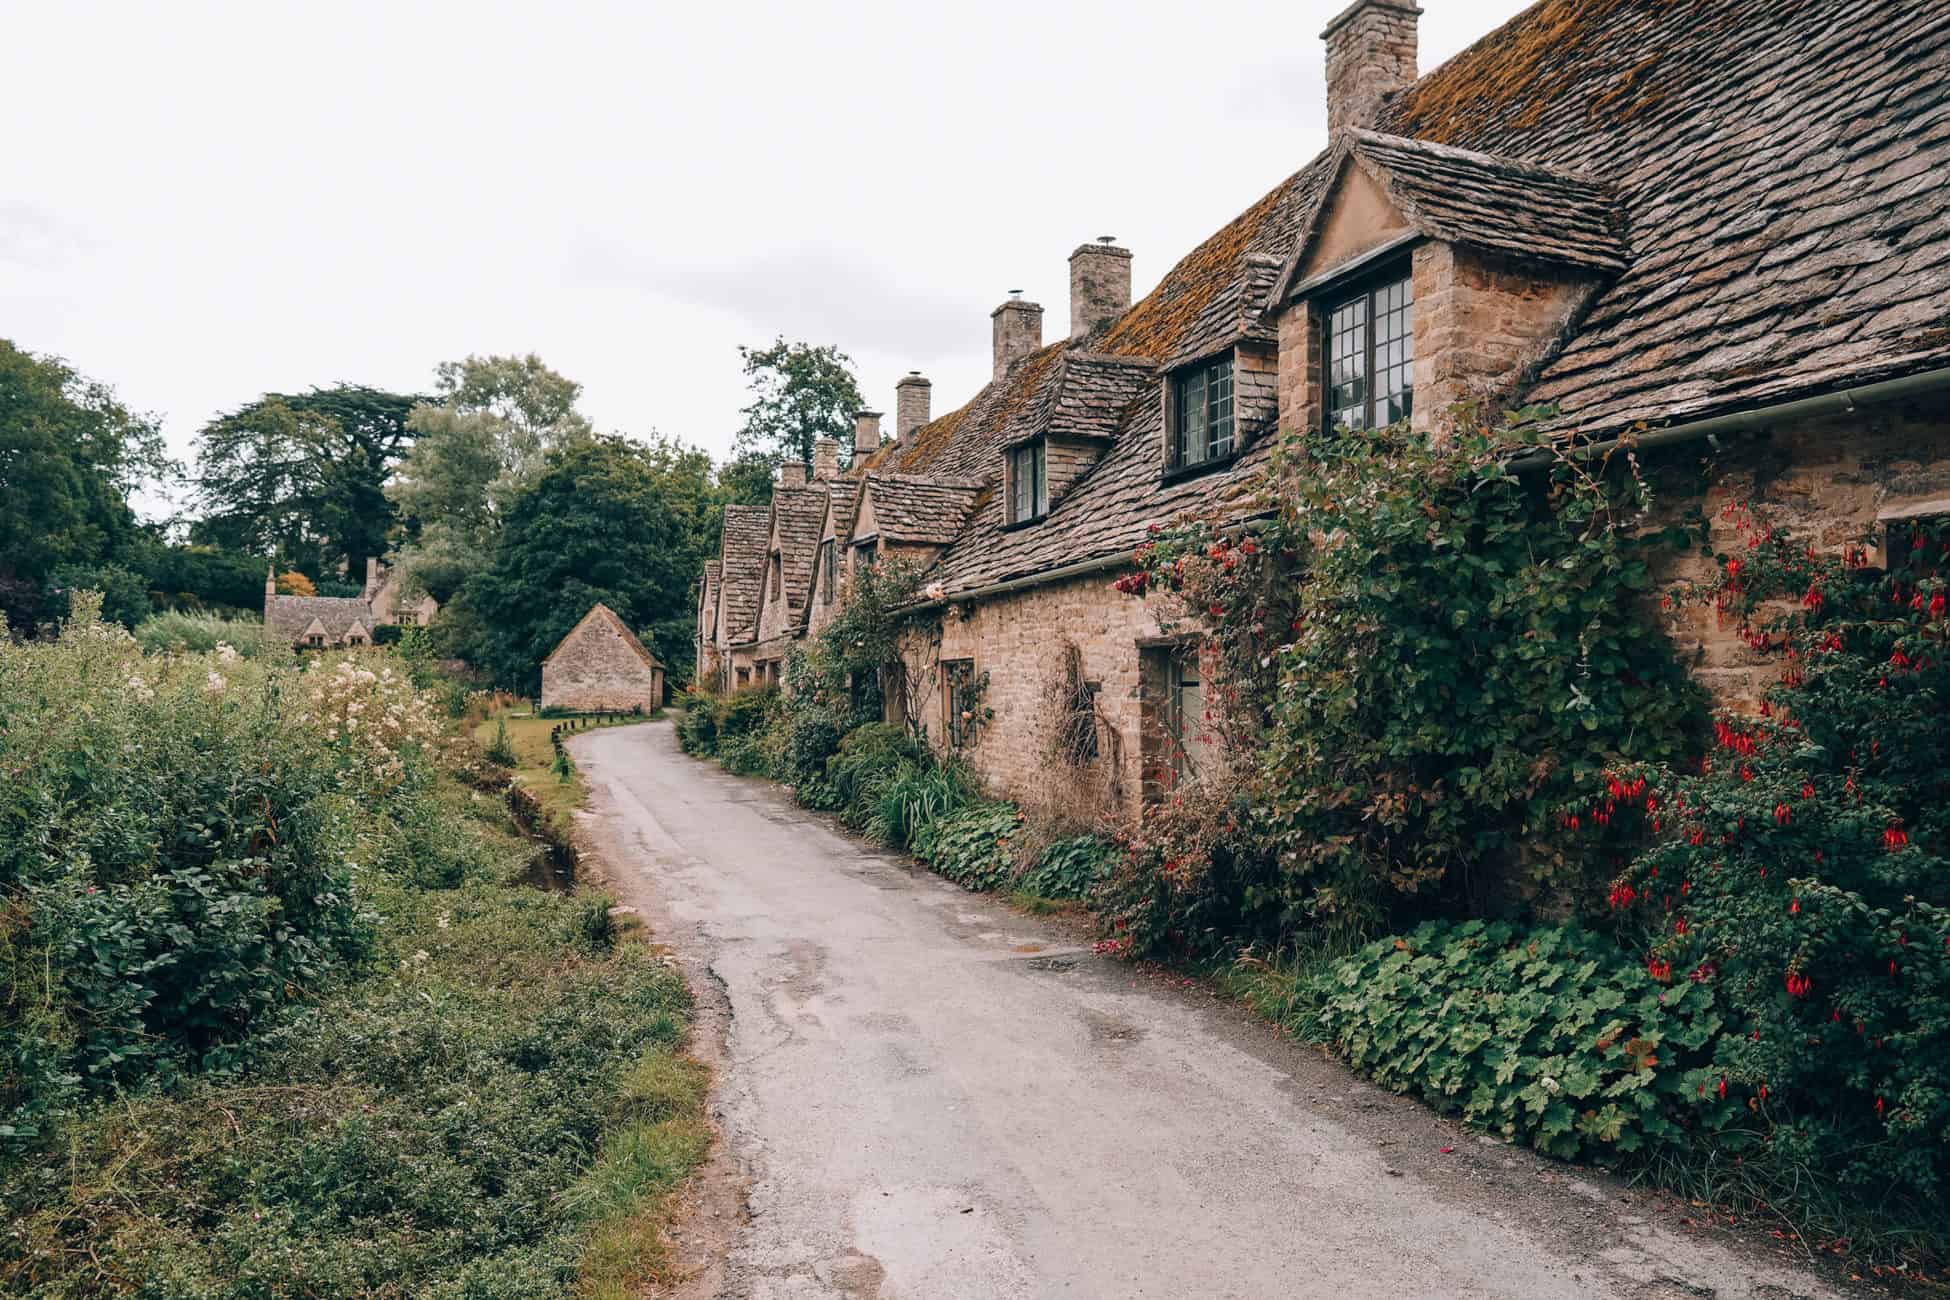 Most Instagrammable places in Cotswolds: Cotswolds' most photogenic villages